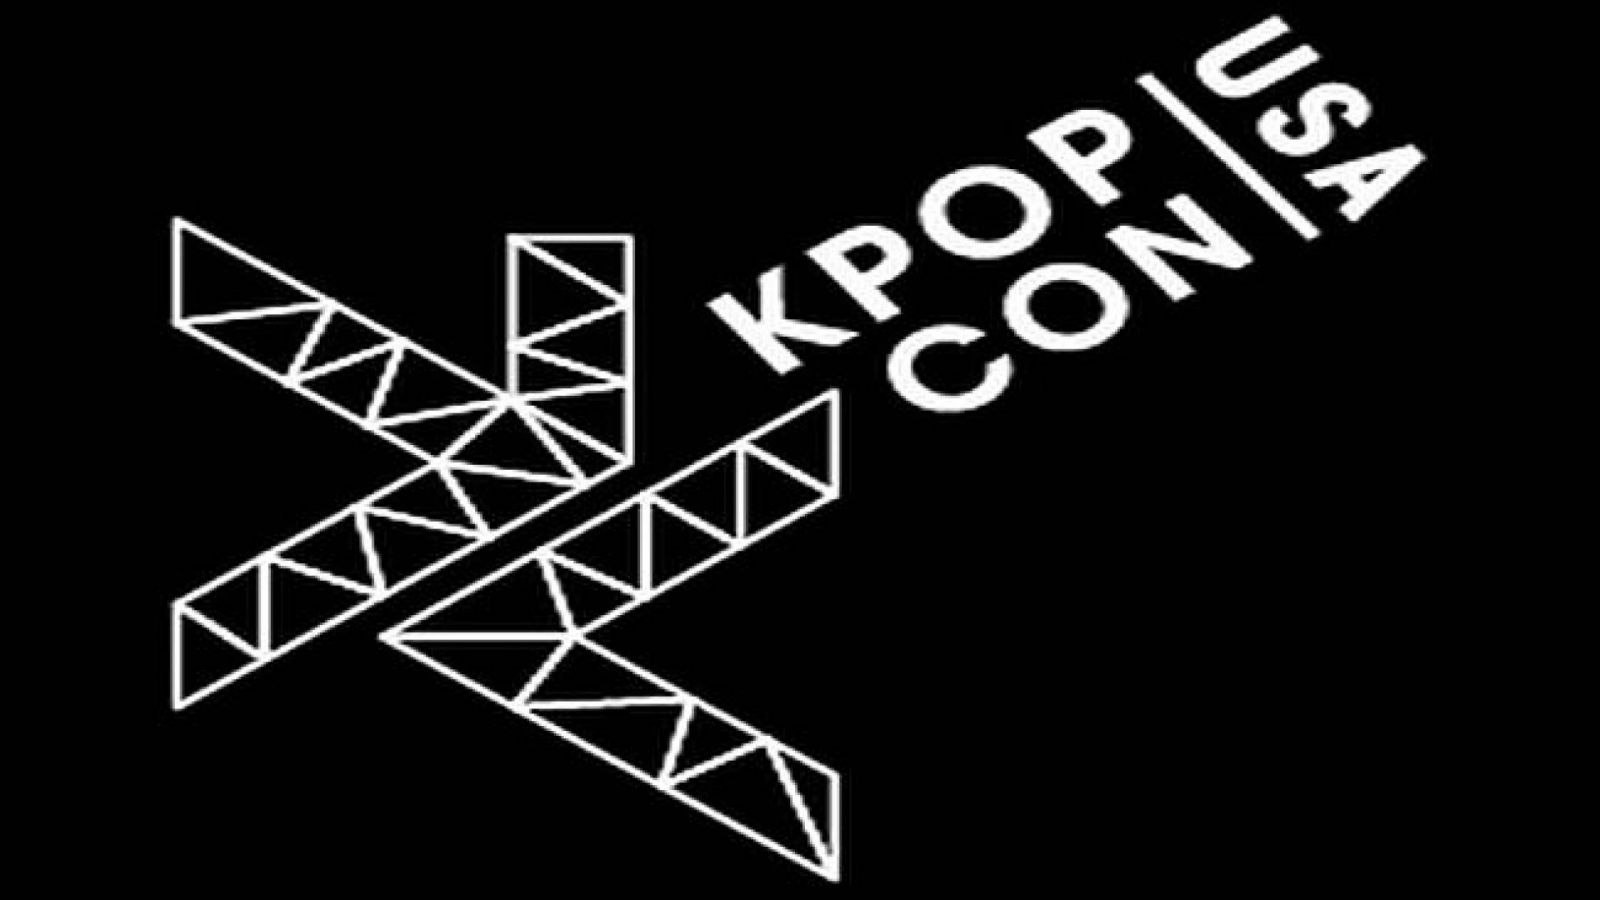 KPOP CON USA is back in 2015! © KPOP CON USA